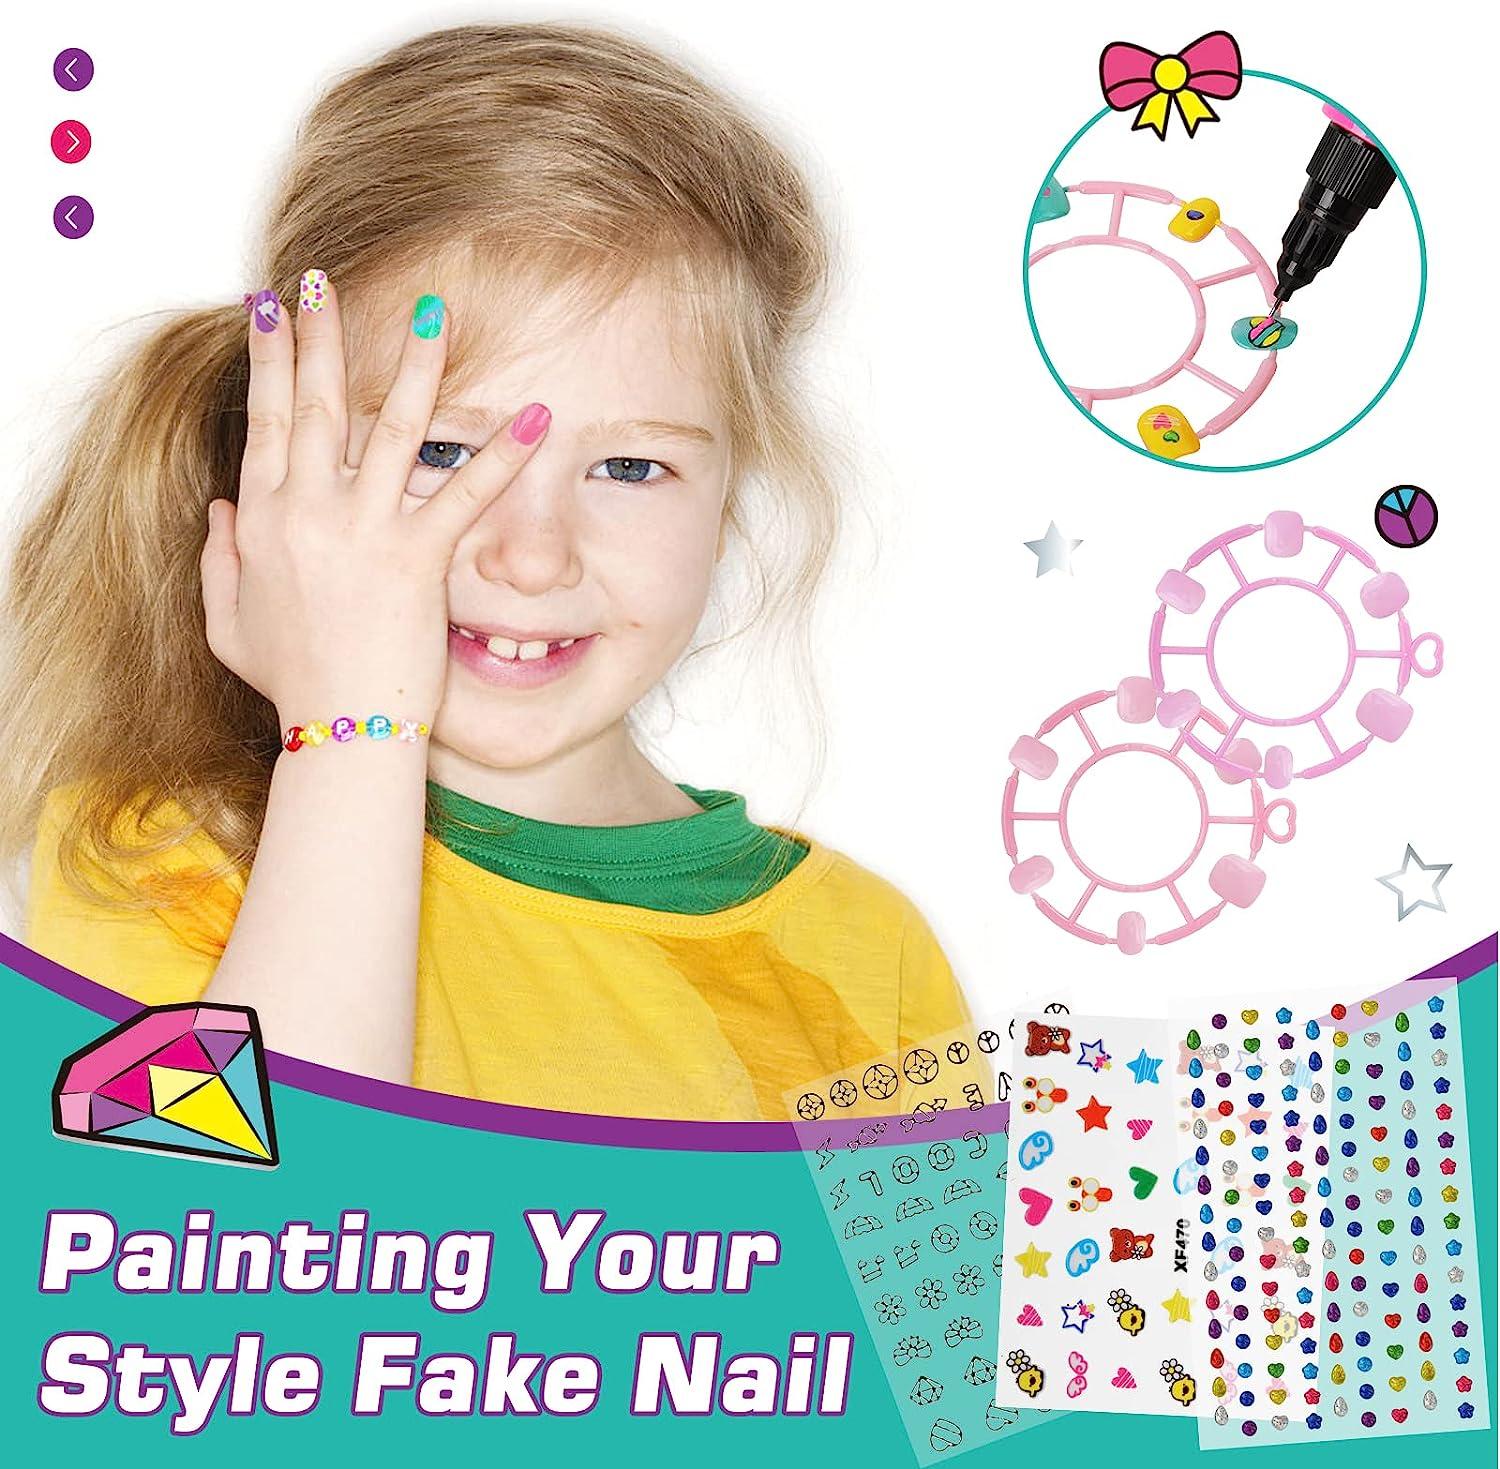 Amagoing Kids Nail Art Kit for Girls 2 in 1 Dryer Nail Salon Set 4 Colorful  Peelable Nail Polishes Fashion Icons Stickers Nail Studio Manicure Play  Party Christmas Gift for Girls Ages 7-12